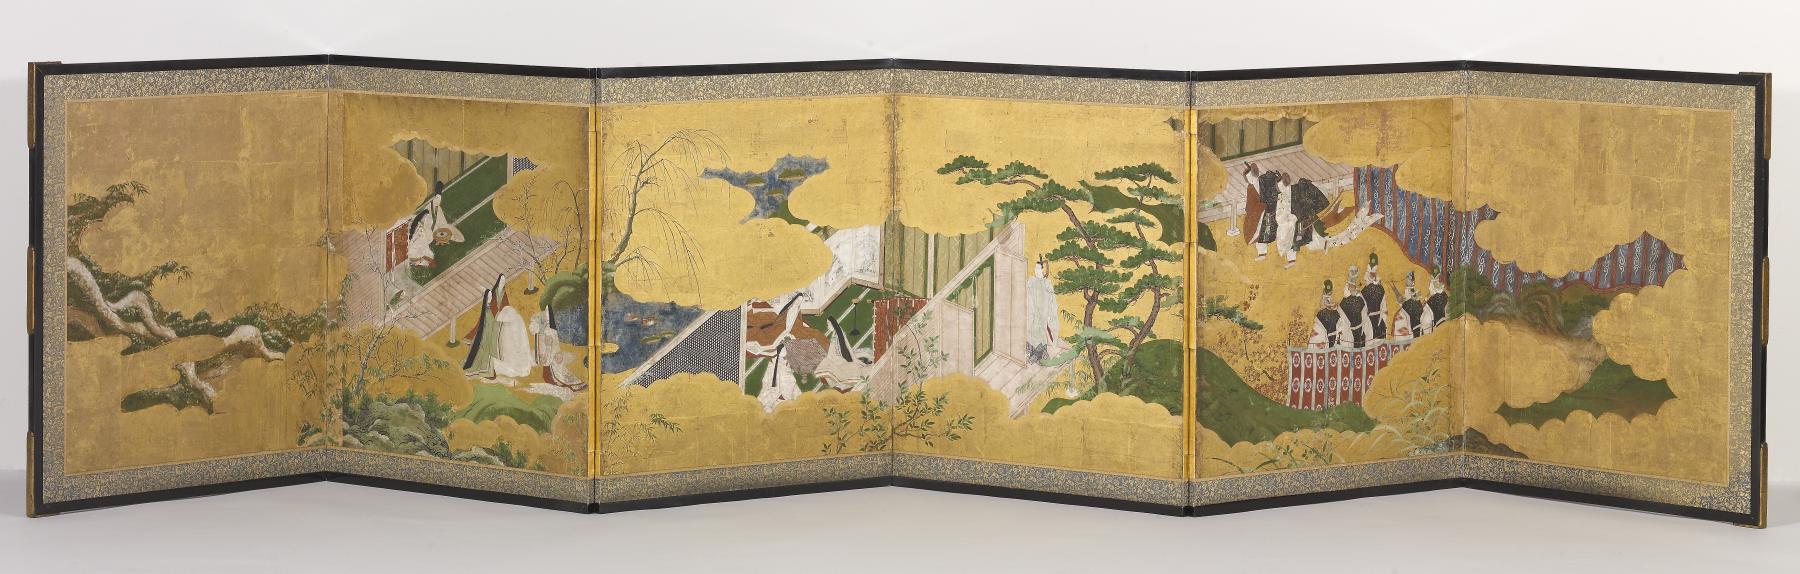 Image for Six-fold Screen with Scenes from "The Genji Monogatari"